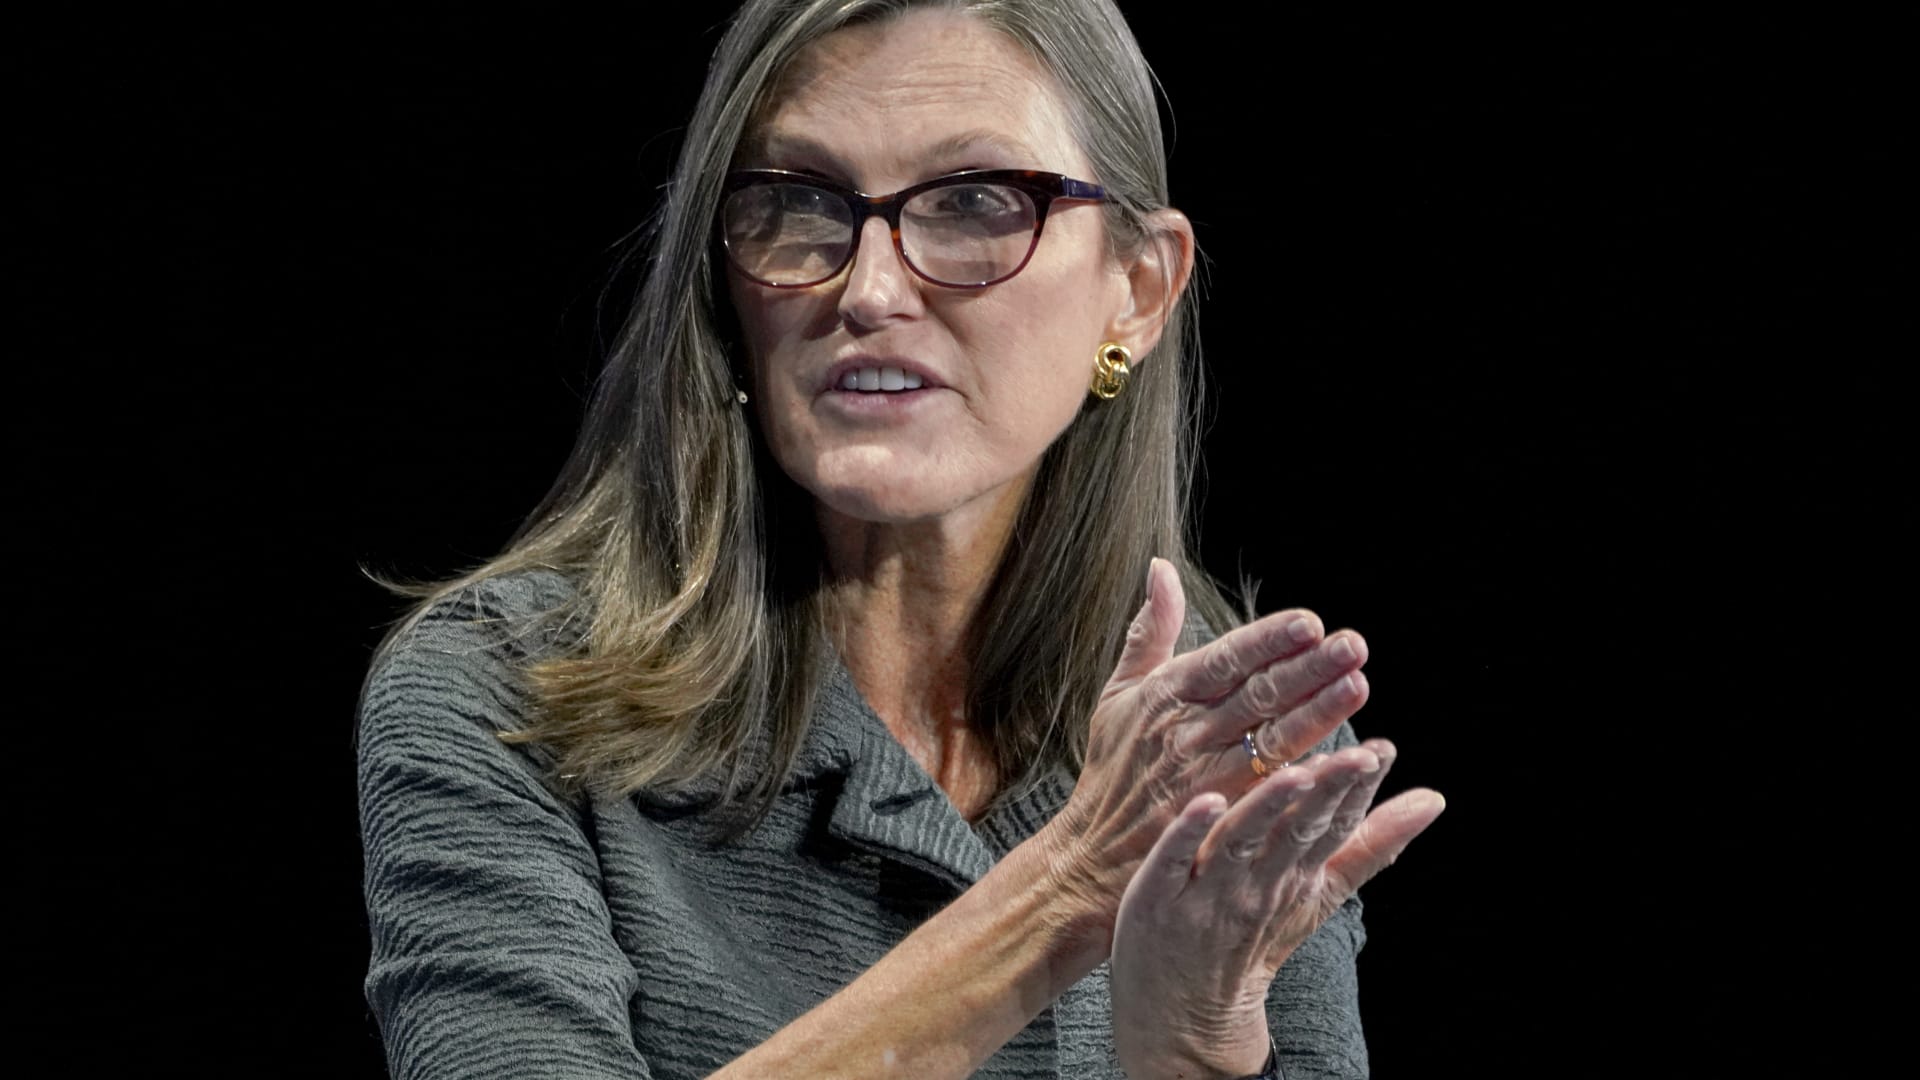 Catherine Wood, chief executive officer of ARK Investment Management LLC, speaks during the Milken Institute Global Conference in Beverly Hills, California, on Monday, Oct. 18, 2021.